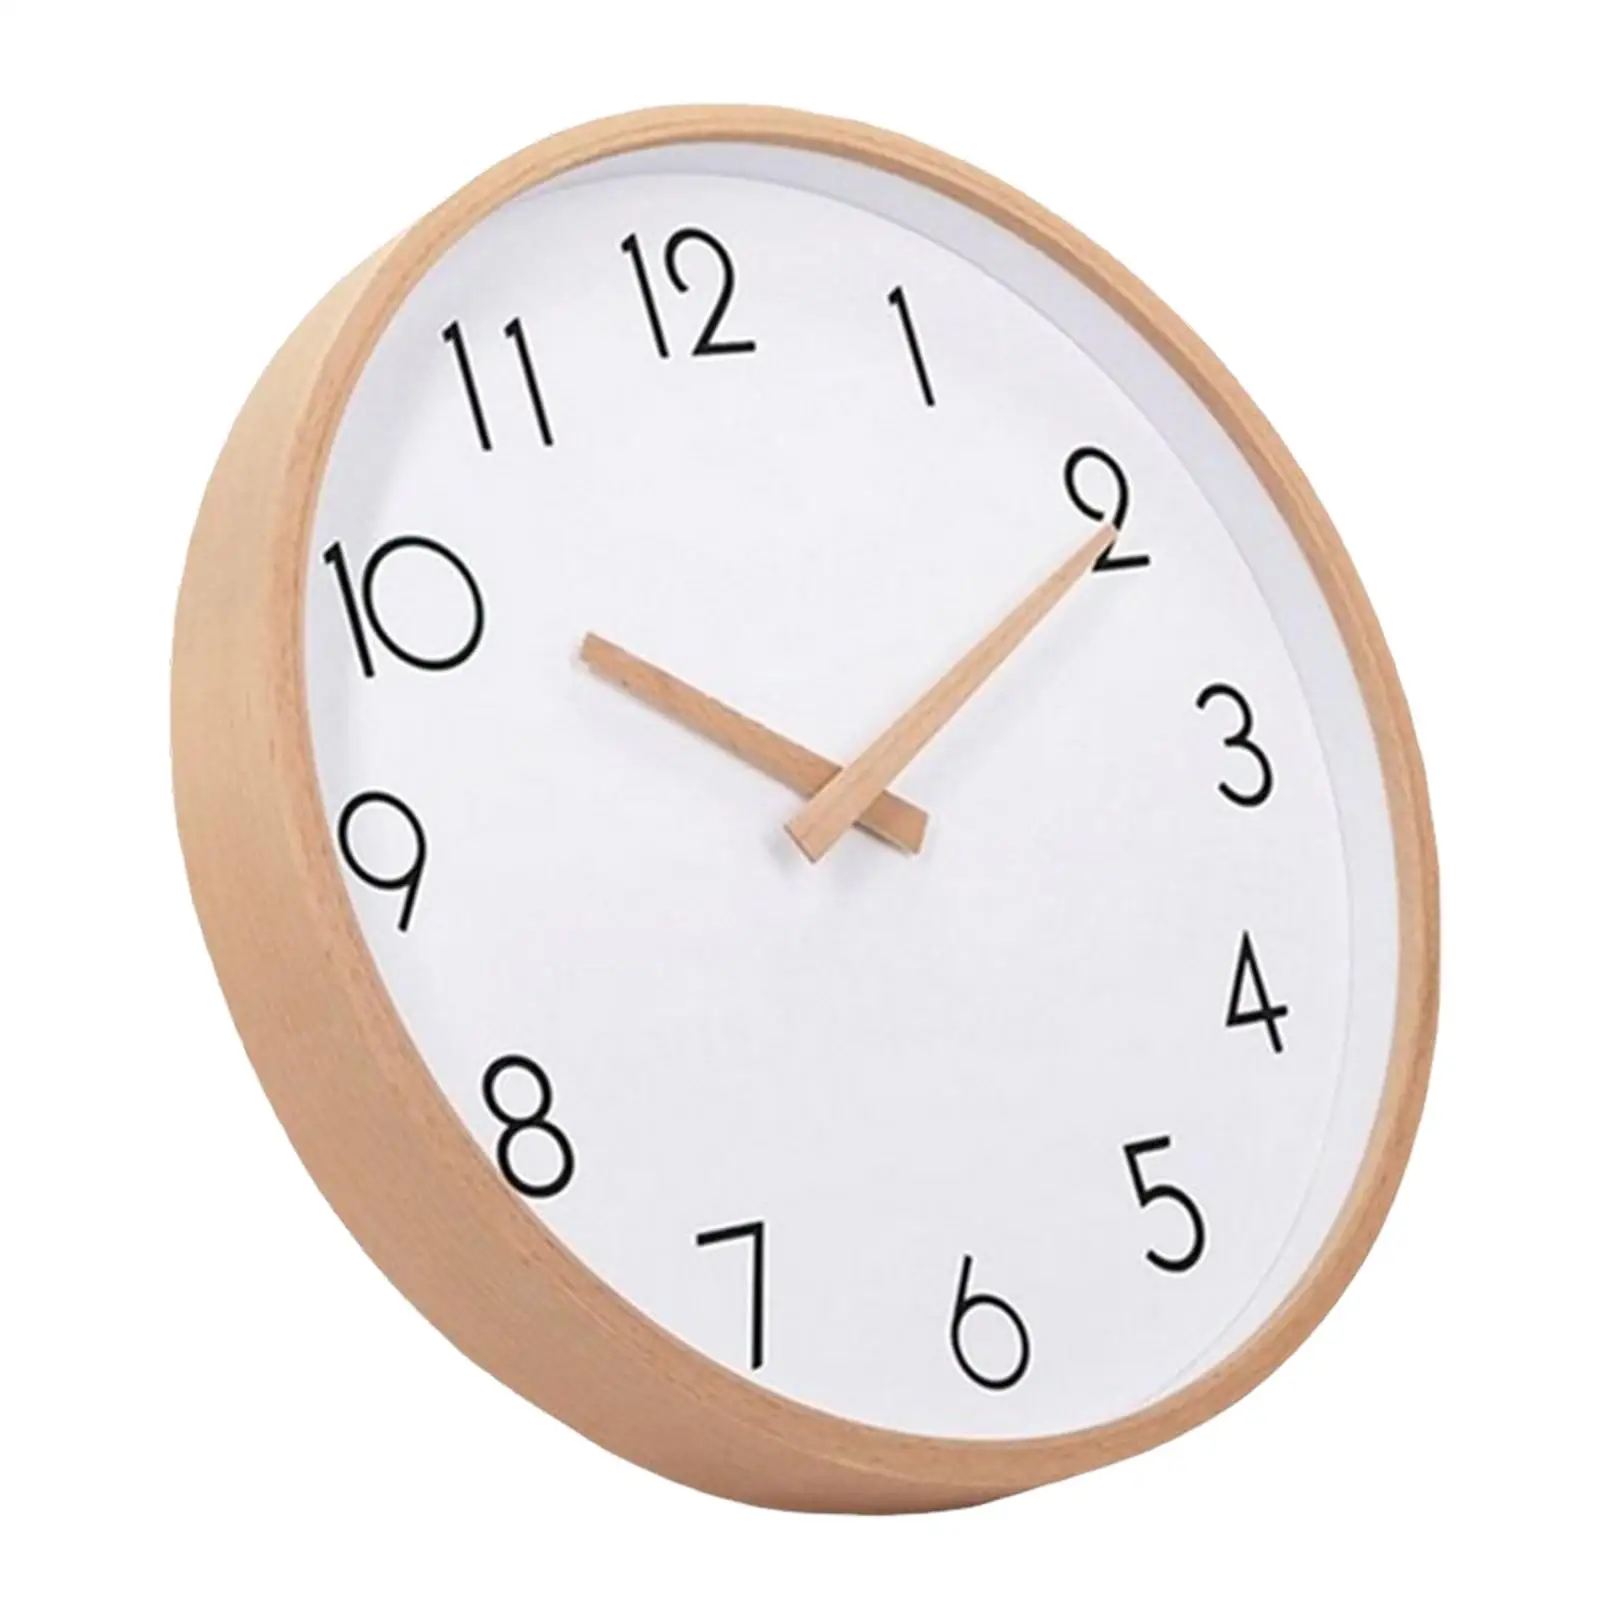 12 Inches Wall Clock Silent Round Modern Wall Clocks Battery Operated with